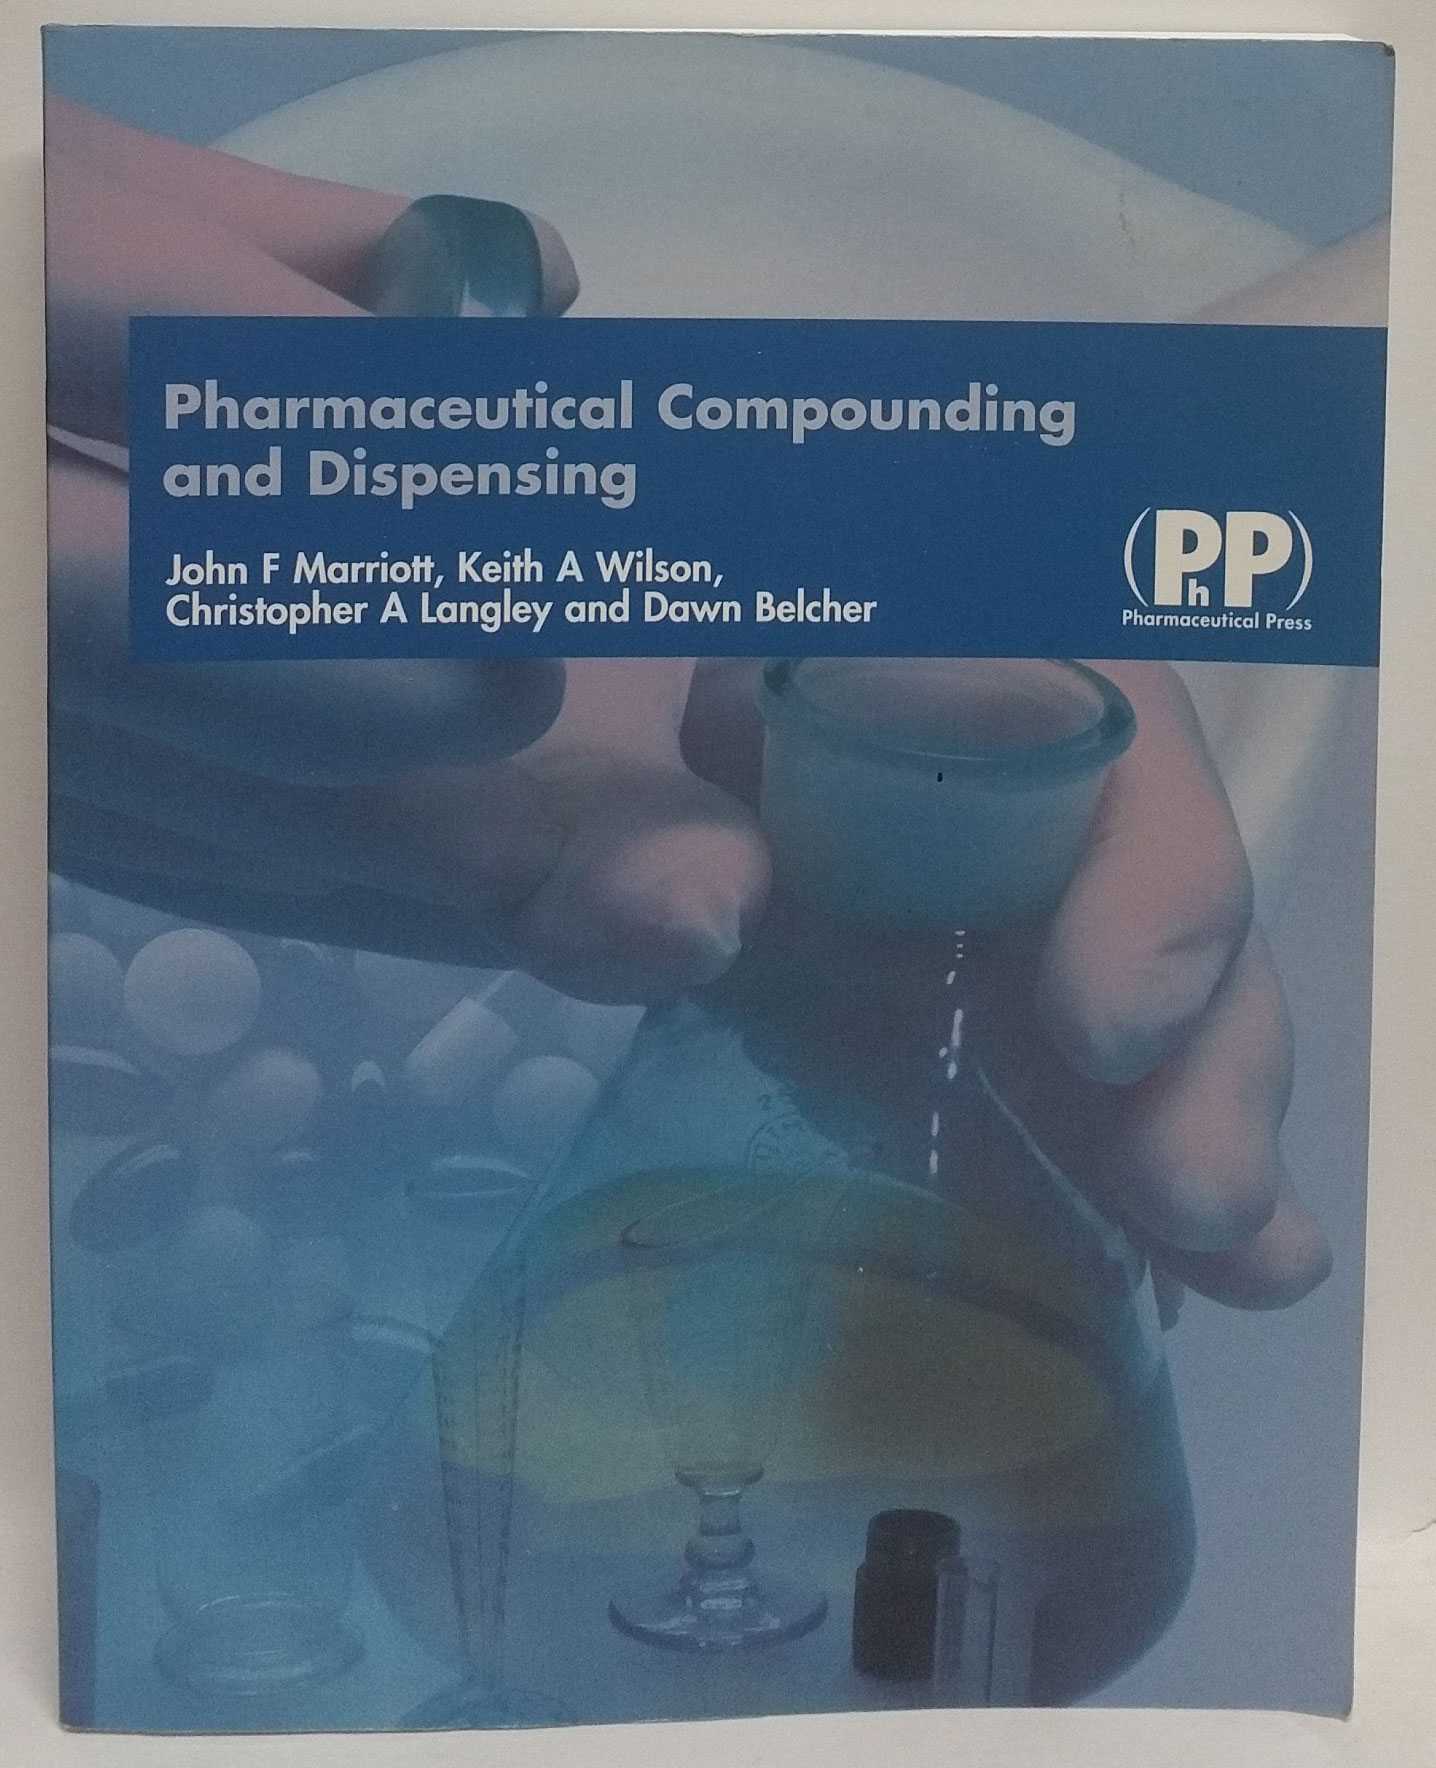 John F. Marriott; Keith A. Wilson; Christopher A. Langley; Dawn Belcher - Pharmaceutical Compounding and Dispensing